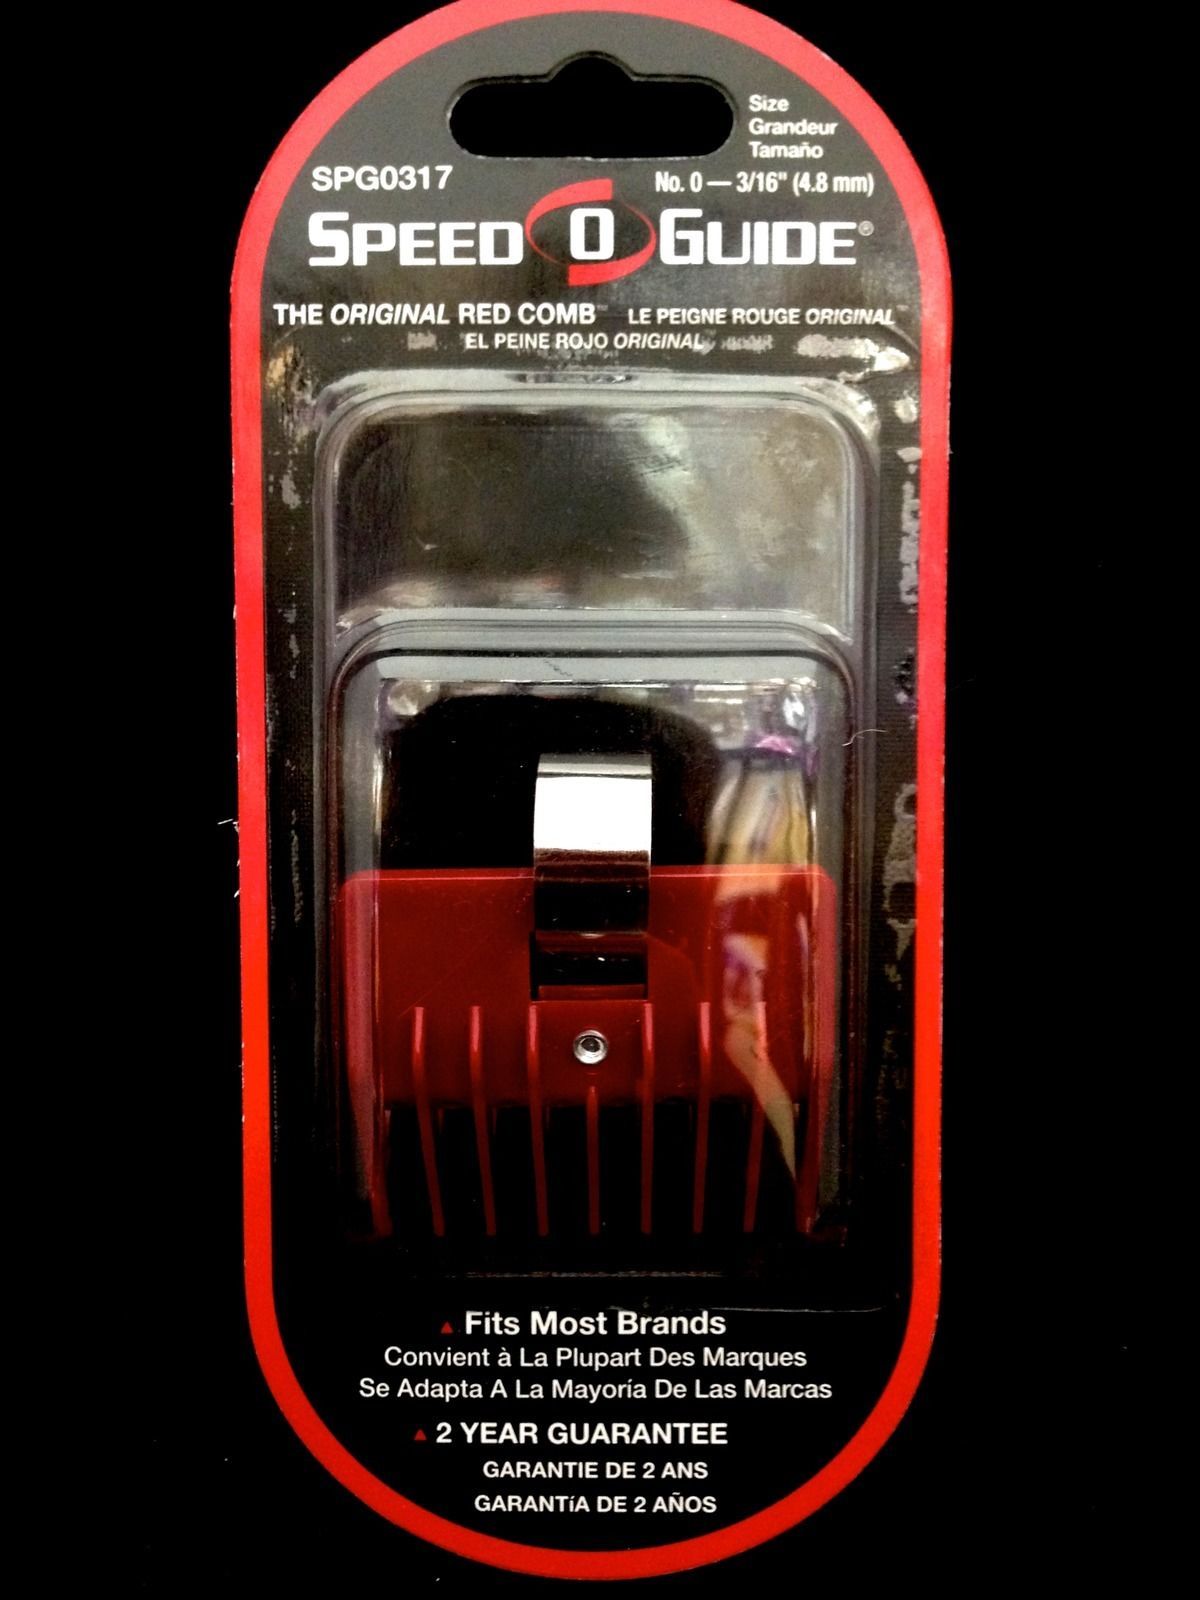 SPEED O GUIDE THE ORIGINAL RED COMB FITS MOST BRANDS SIZE No. 0A 5/16" 7.9mm - $2.99